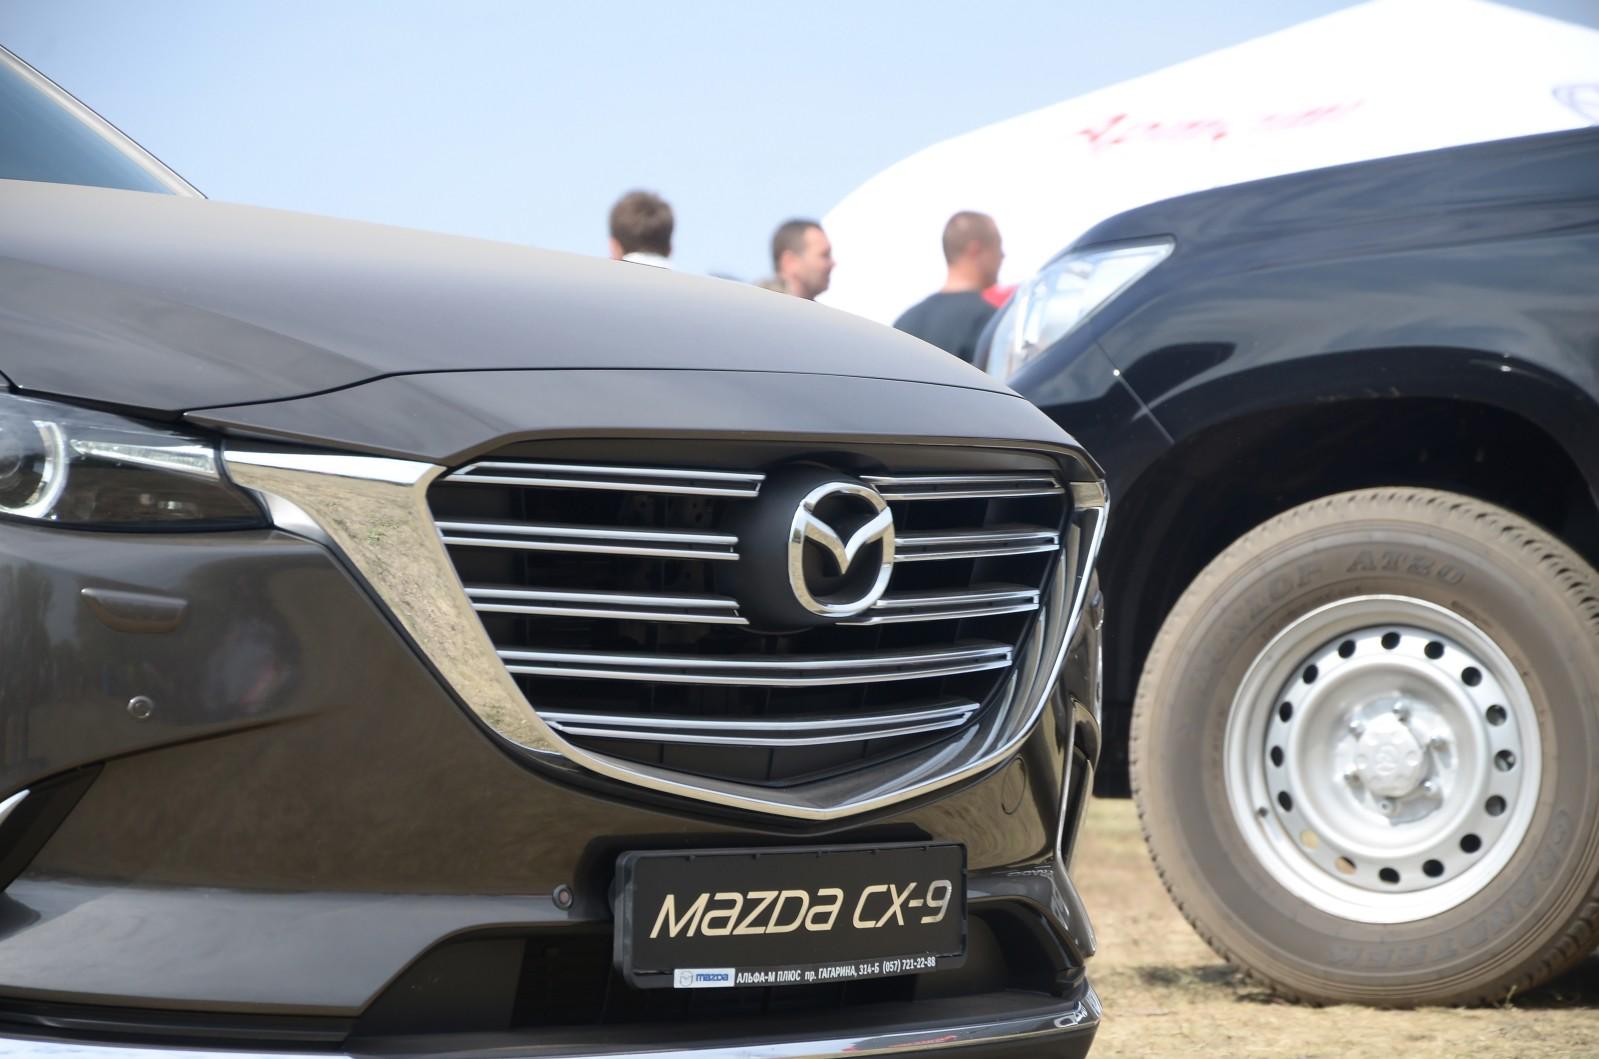 Mazda has affordable and critically acclaimed lineup | Twenty20